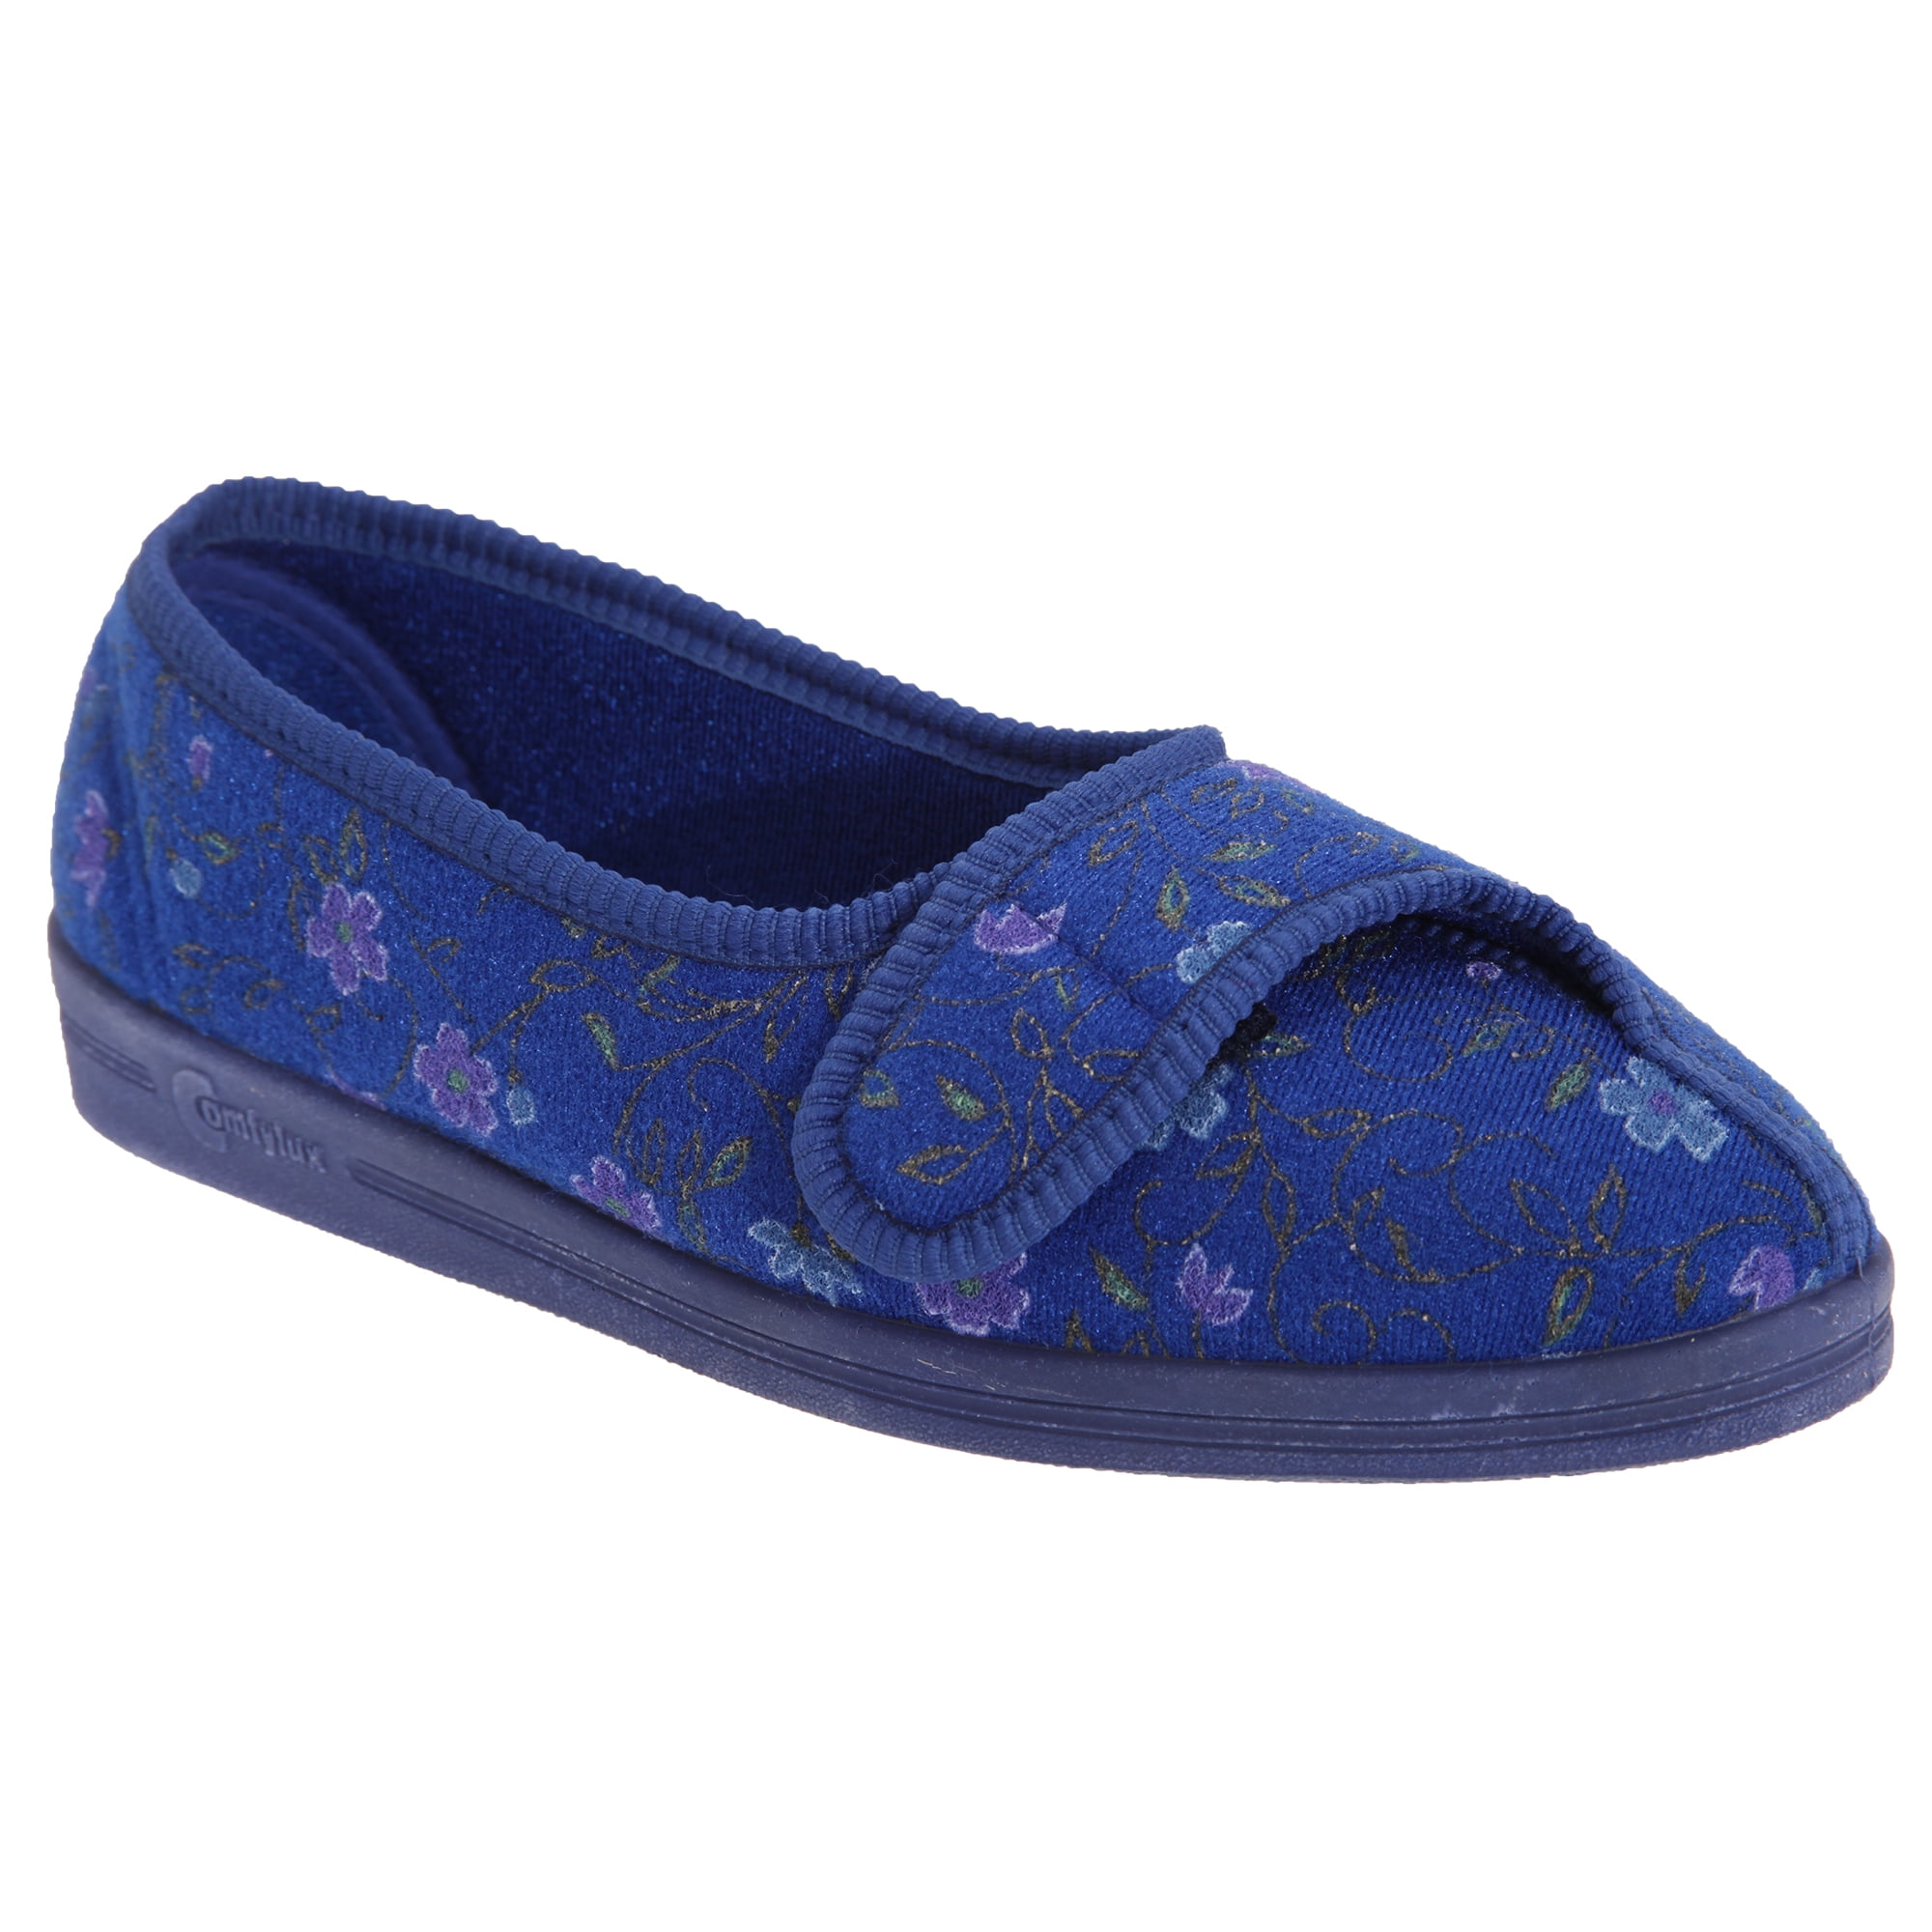 NEW SLEEPERS JOLENE WOMENS TOUCH FASTENING HEATHER EMBROIDERED SLIPPER SLIPPERS 